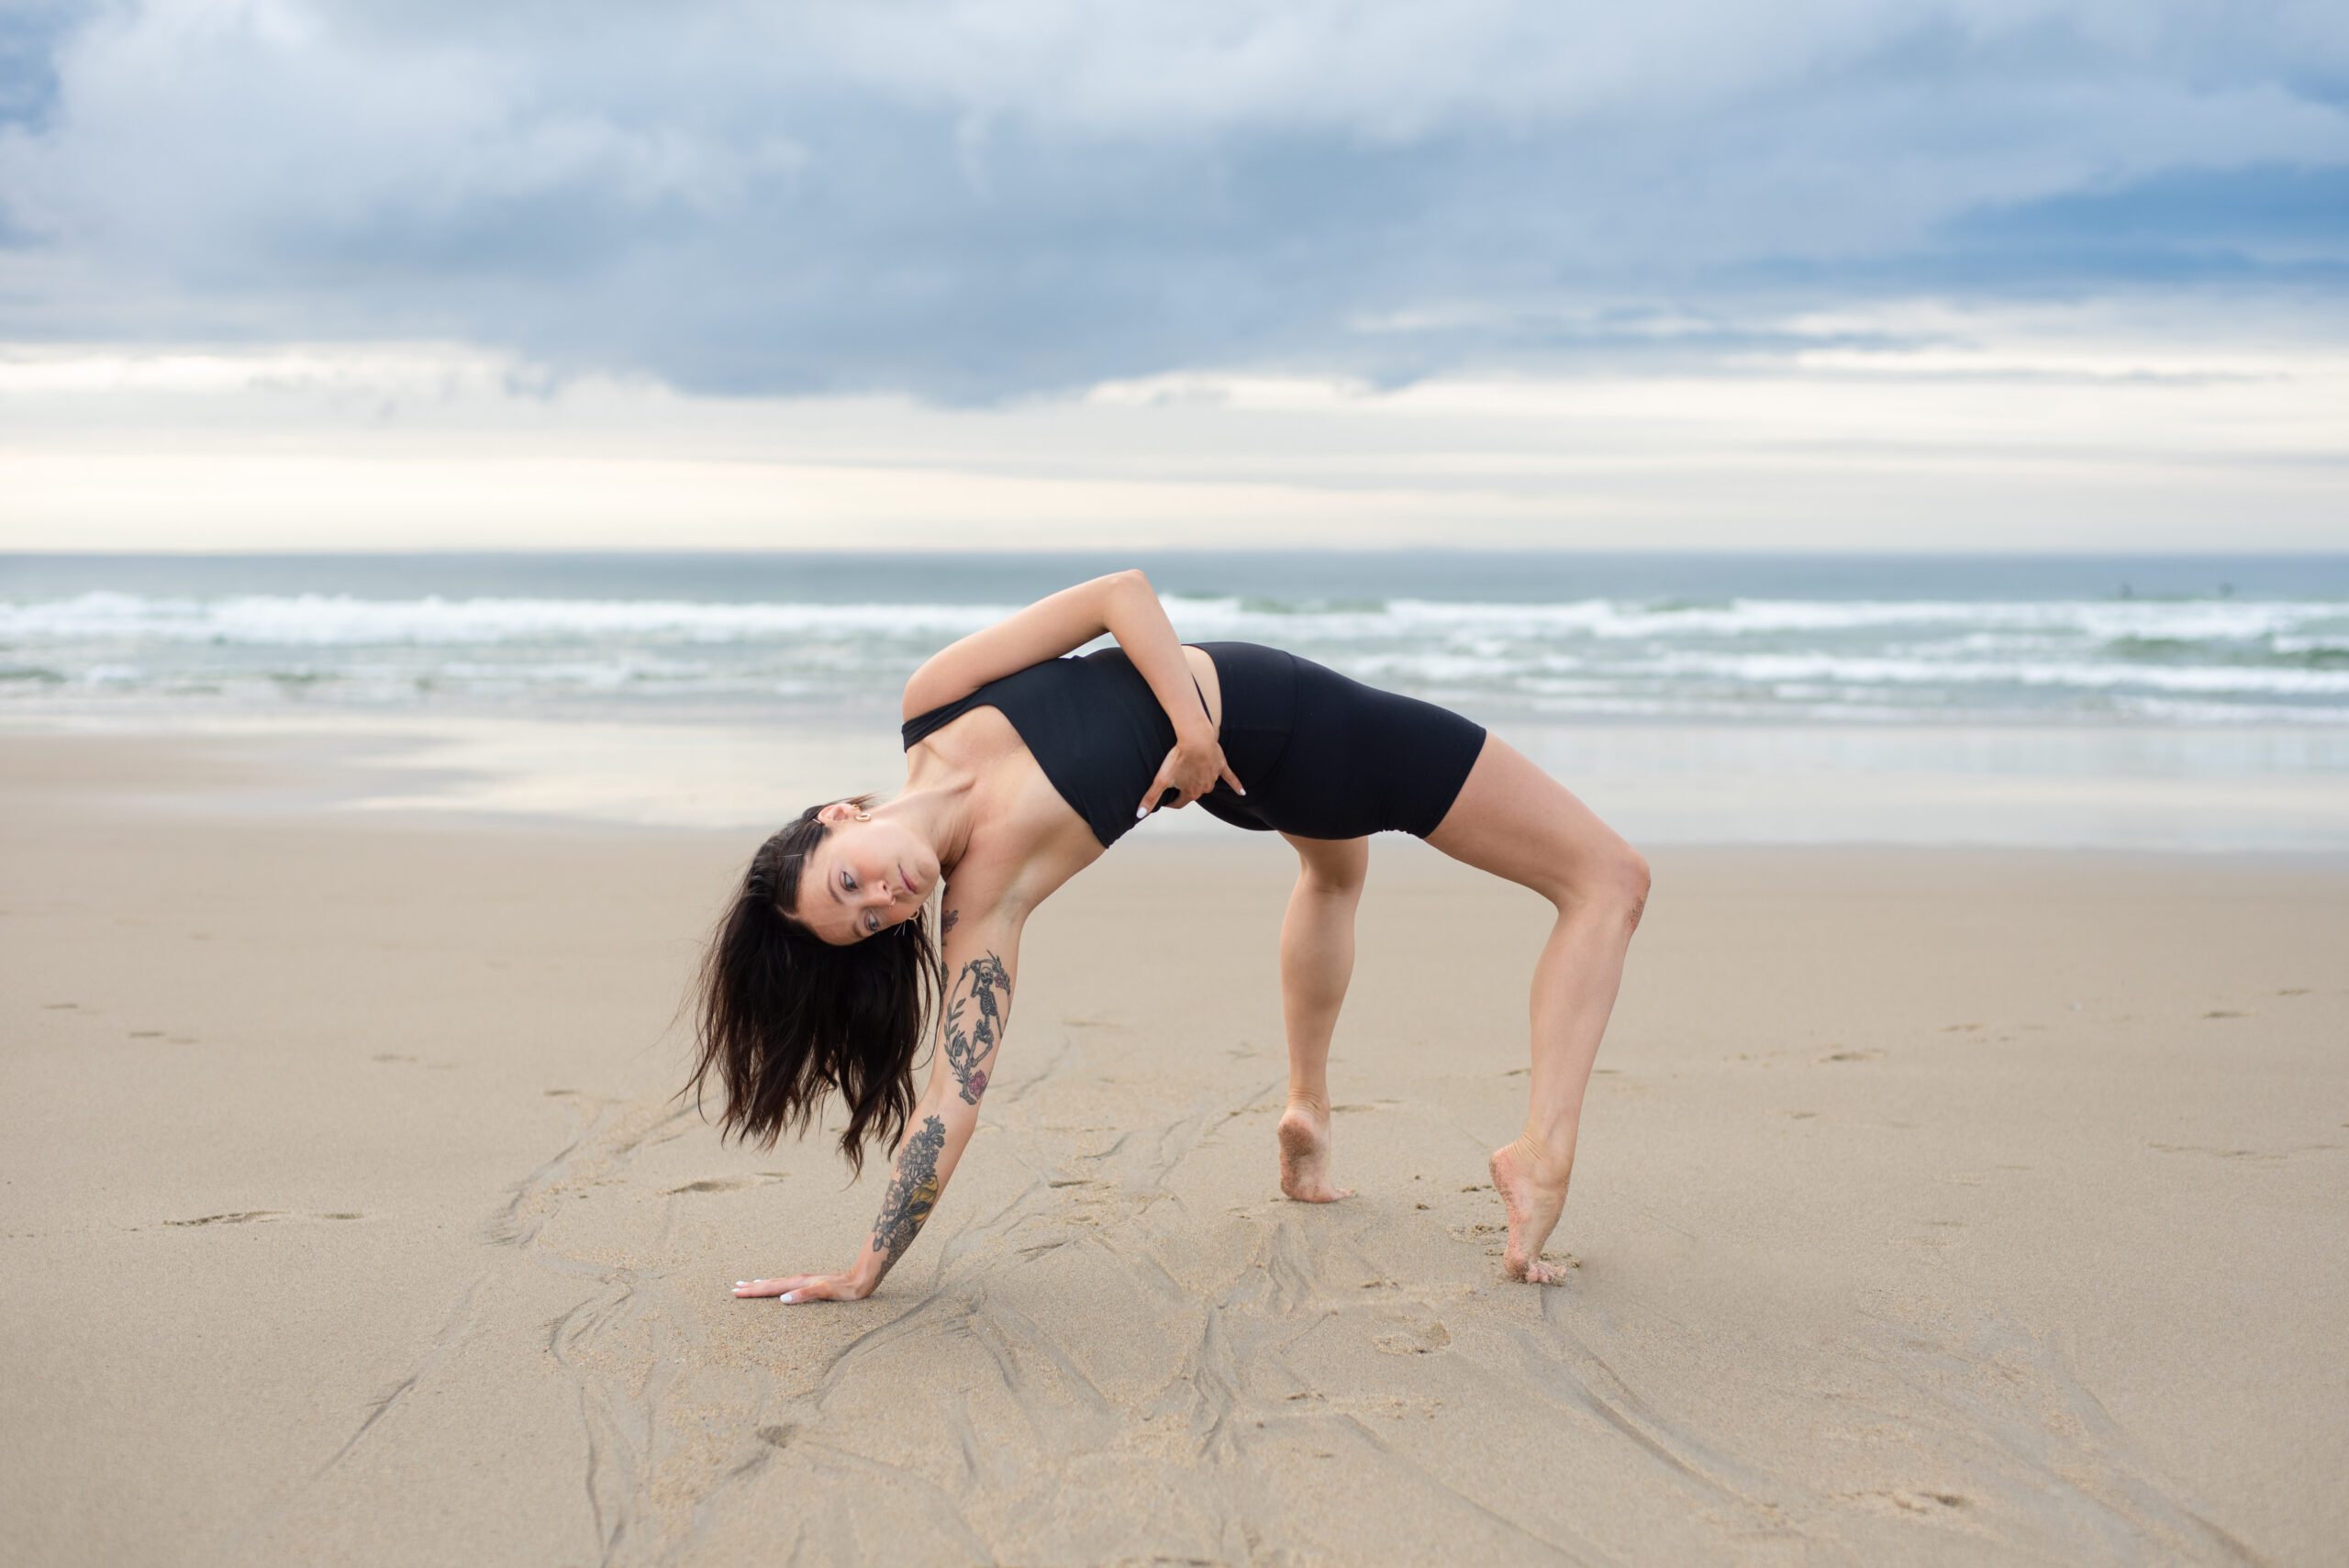 The author, a white woman with dark hair and tattoos on her right arm, dancing on the beach, suspended in a forced arch bridge shape with her left arm wrapped around her torso.